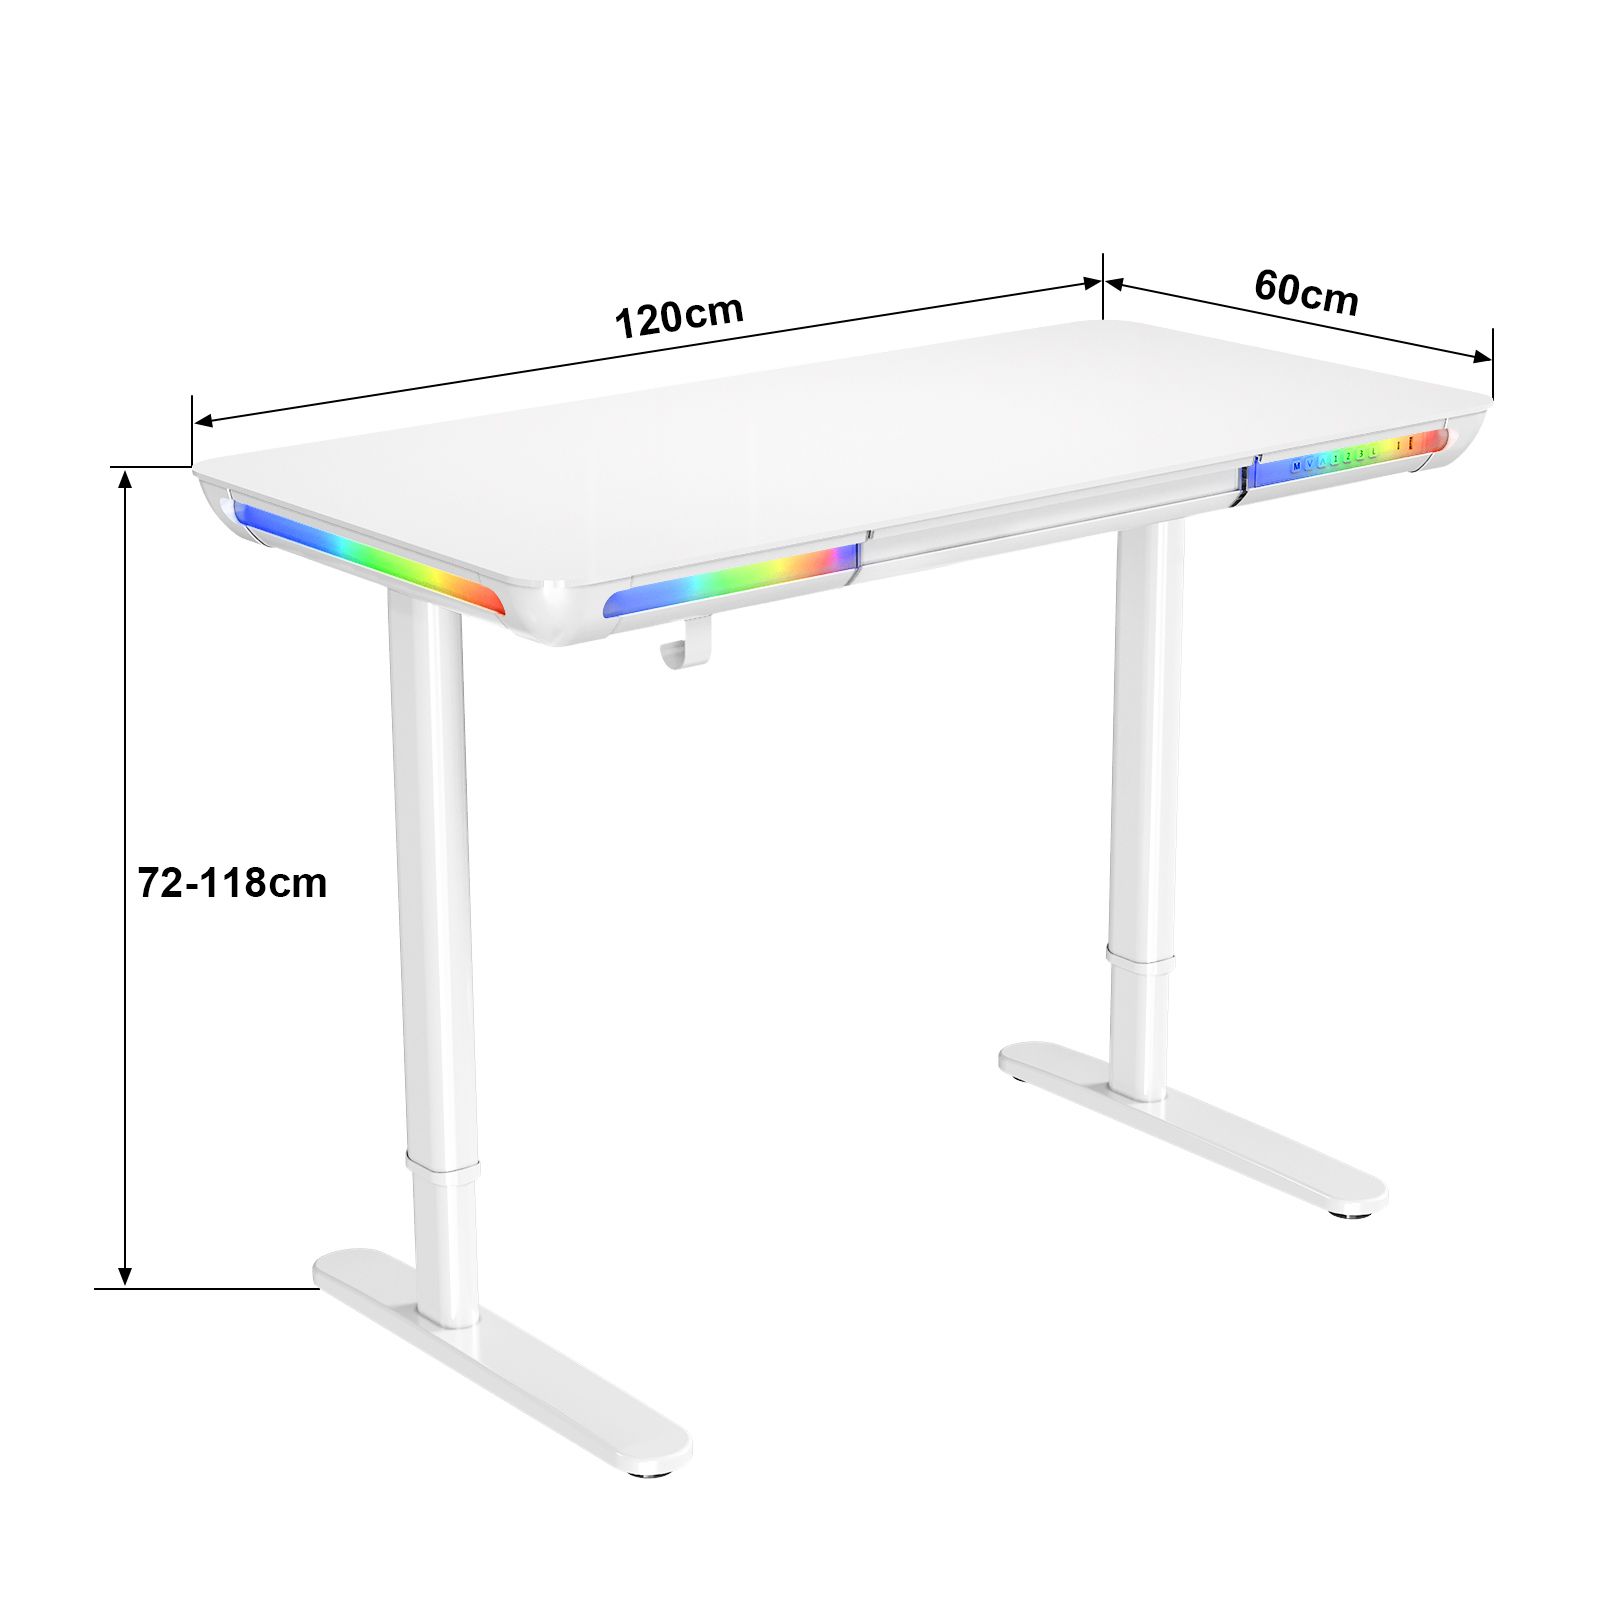 Electric Standing Desk Sit Stand Up Computer Table Height Adjustable Rising Office Workstation Motorised Tempered Glass RGB LED Lights USB White